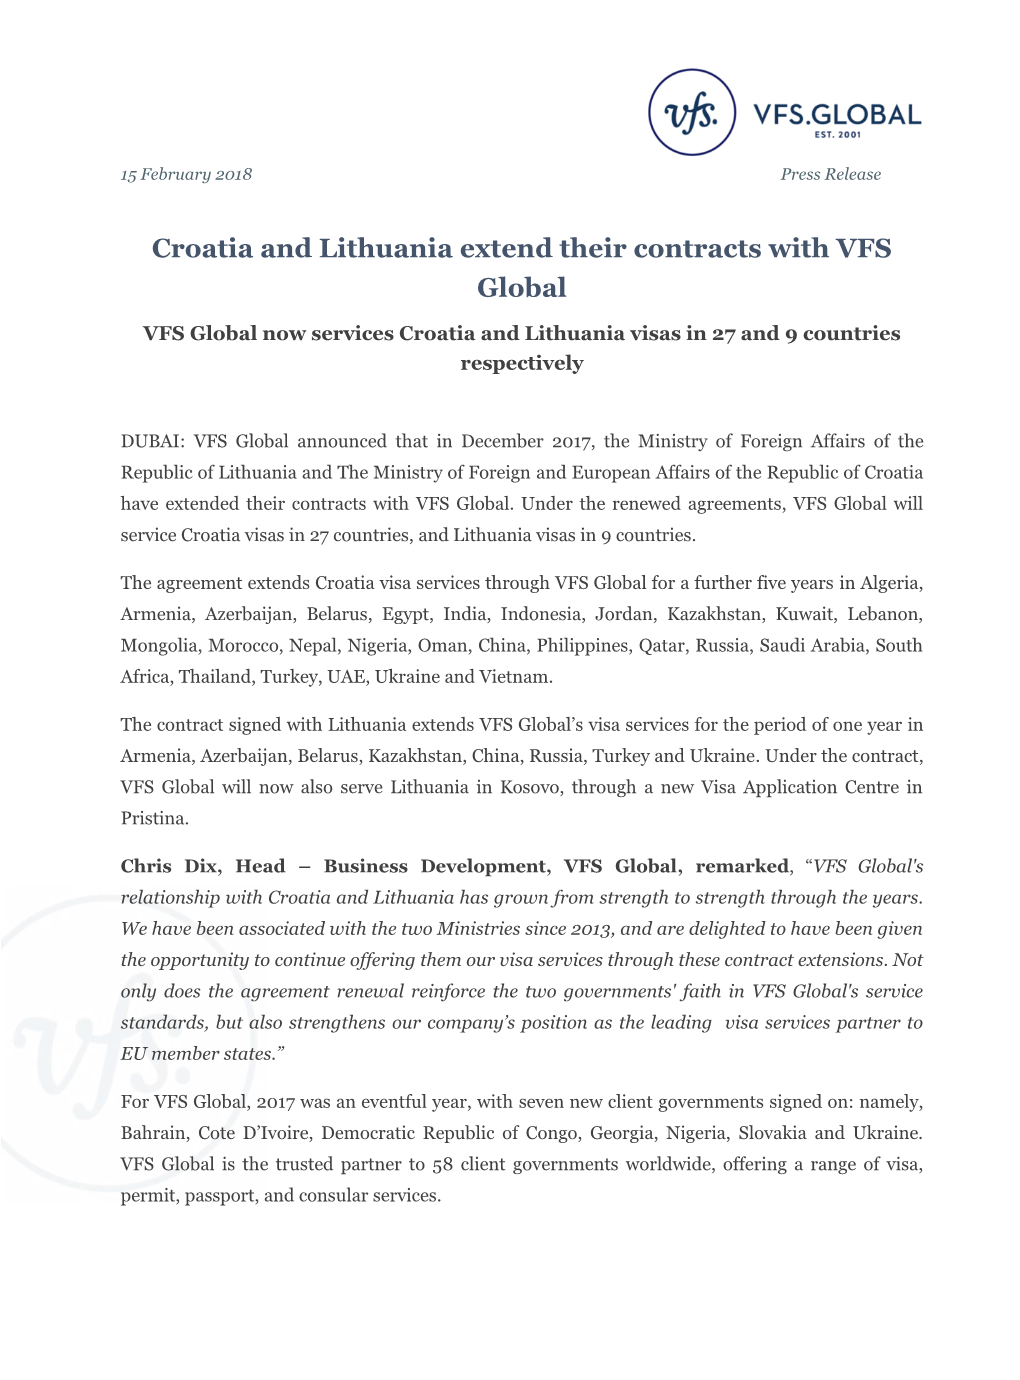 Croatia and Lithuania Extend Their Contracts with VFS Global